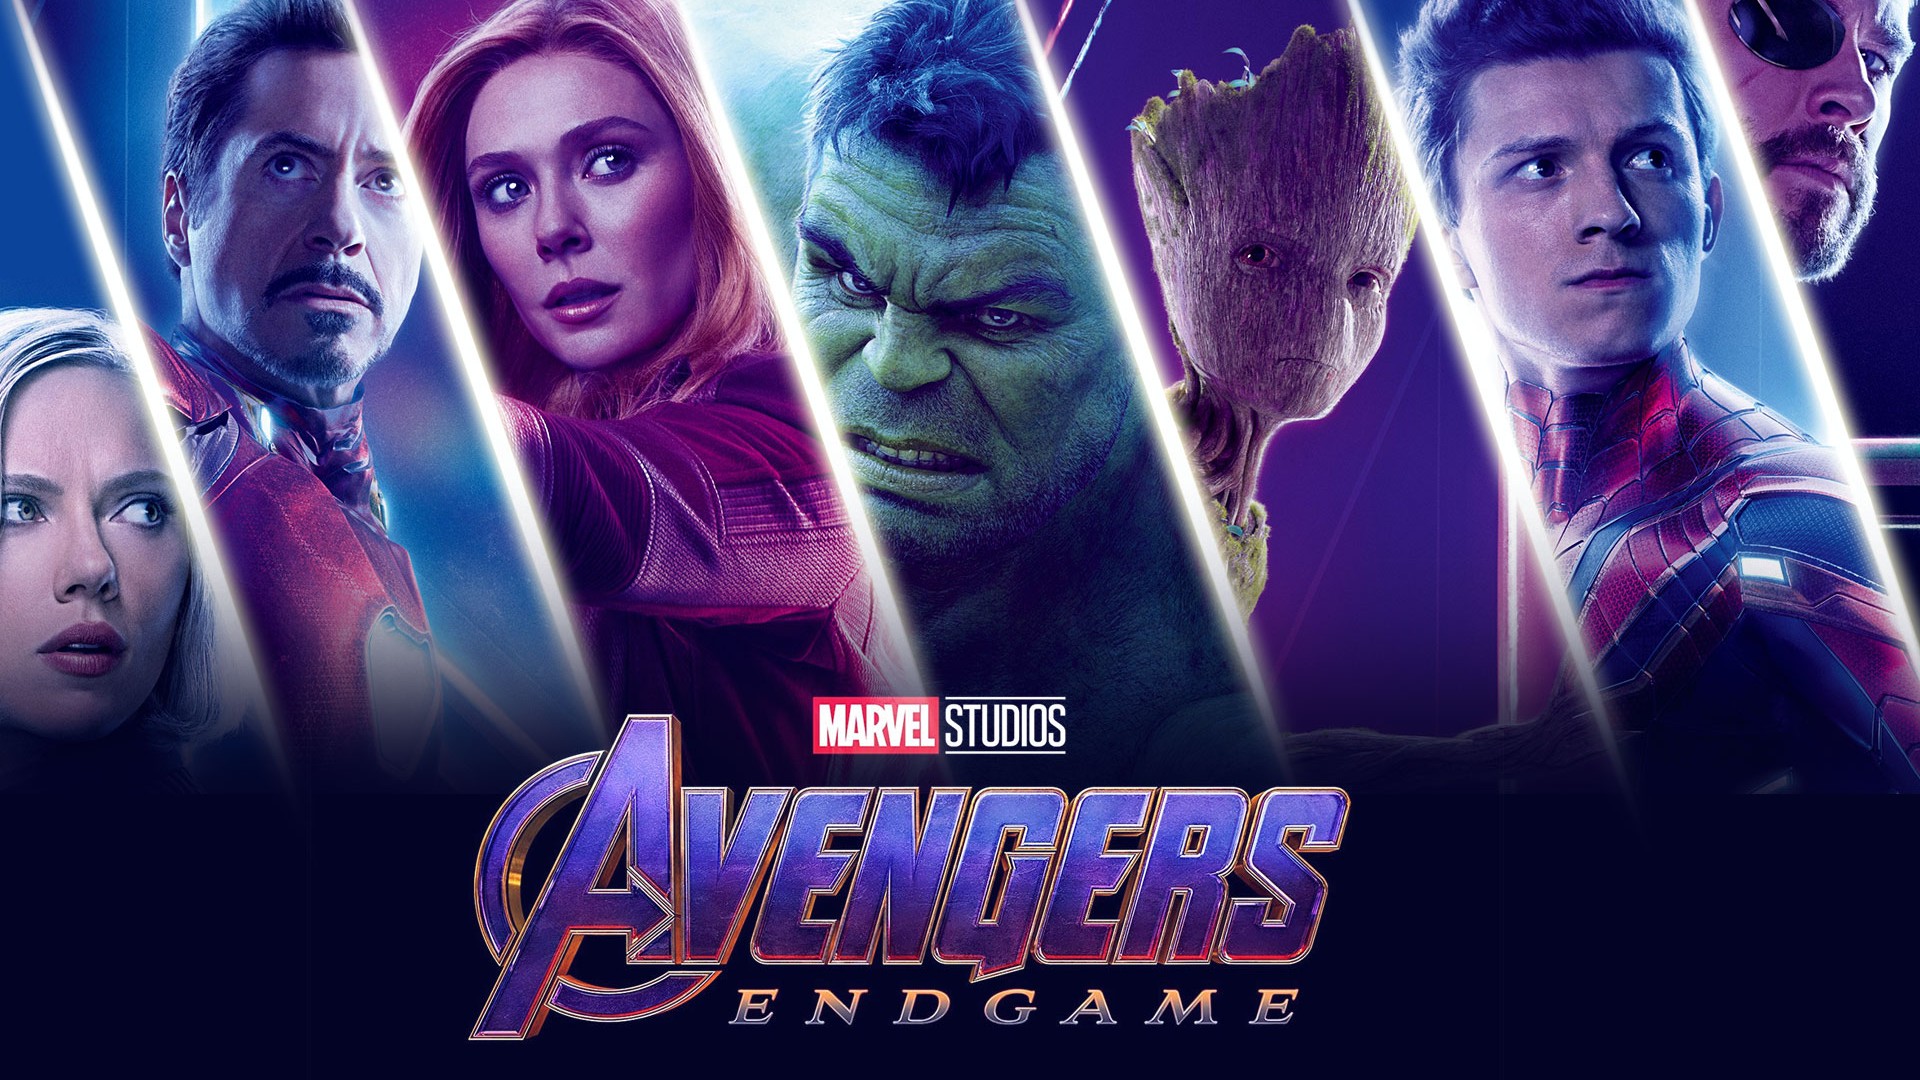 Wallpapers Avengers Endgame with high-resolution 1920x1080 pixel. You can use this poster wallpaper for your Desktop Computers, Mac Screensavers, Windows Backgrounds, iPhone Wallpapers, Tablet or Android Lock screen and another Mobile device